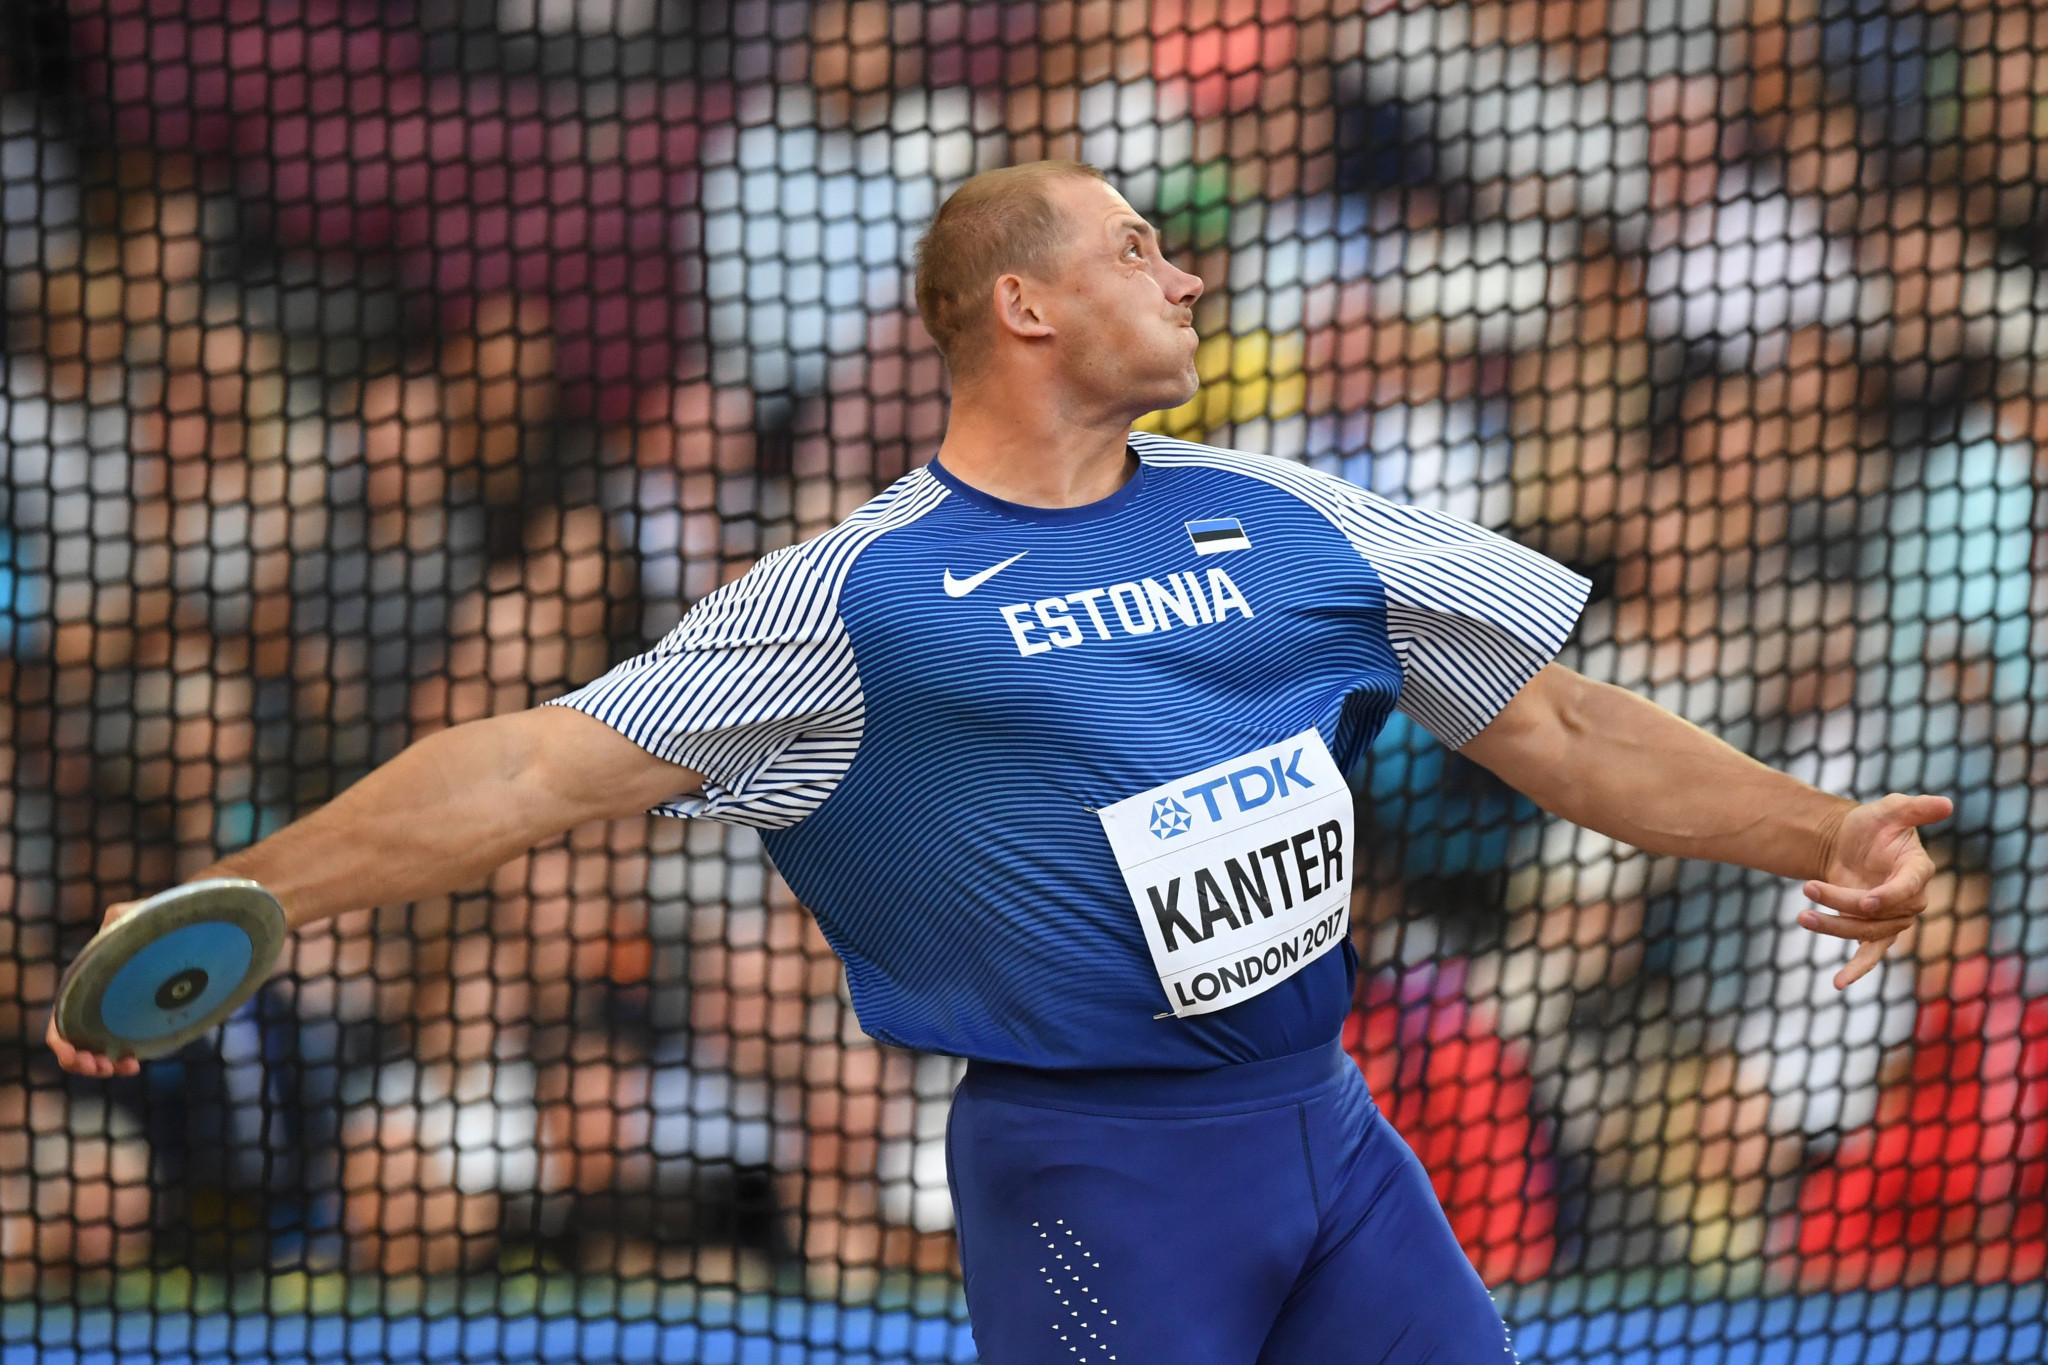 Estonia's Olympic gold medallist Gerd Kanter is set to replace Belgium's Jean-Michel Saive on the ANOC Athletes' Commission after the latter stood down as chair of the EOC Athletes' Commission ©Getty Images